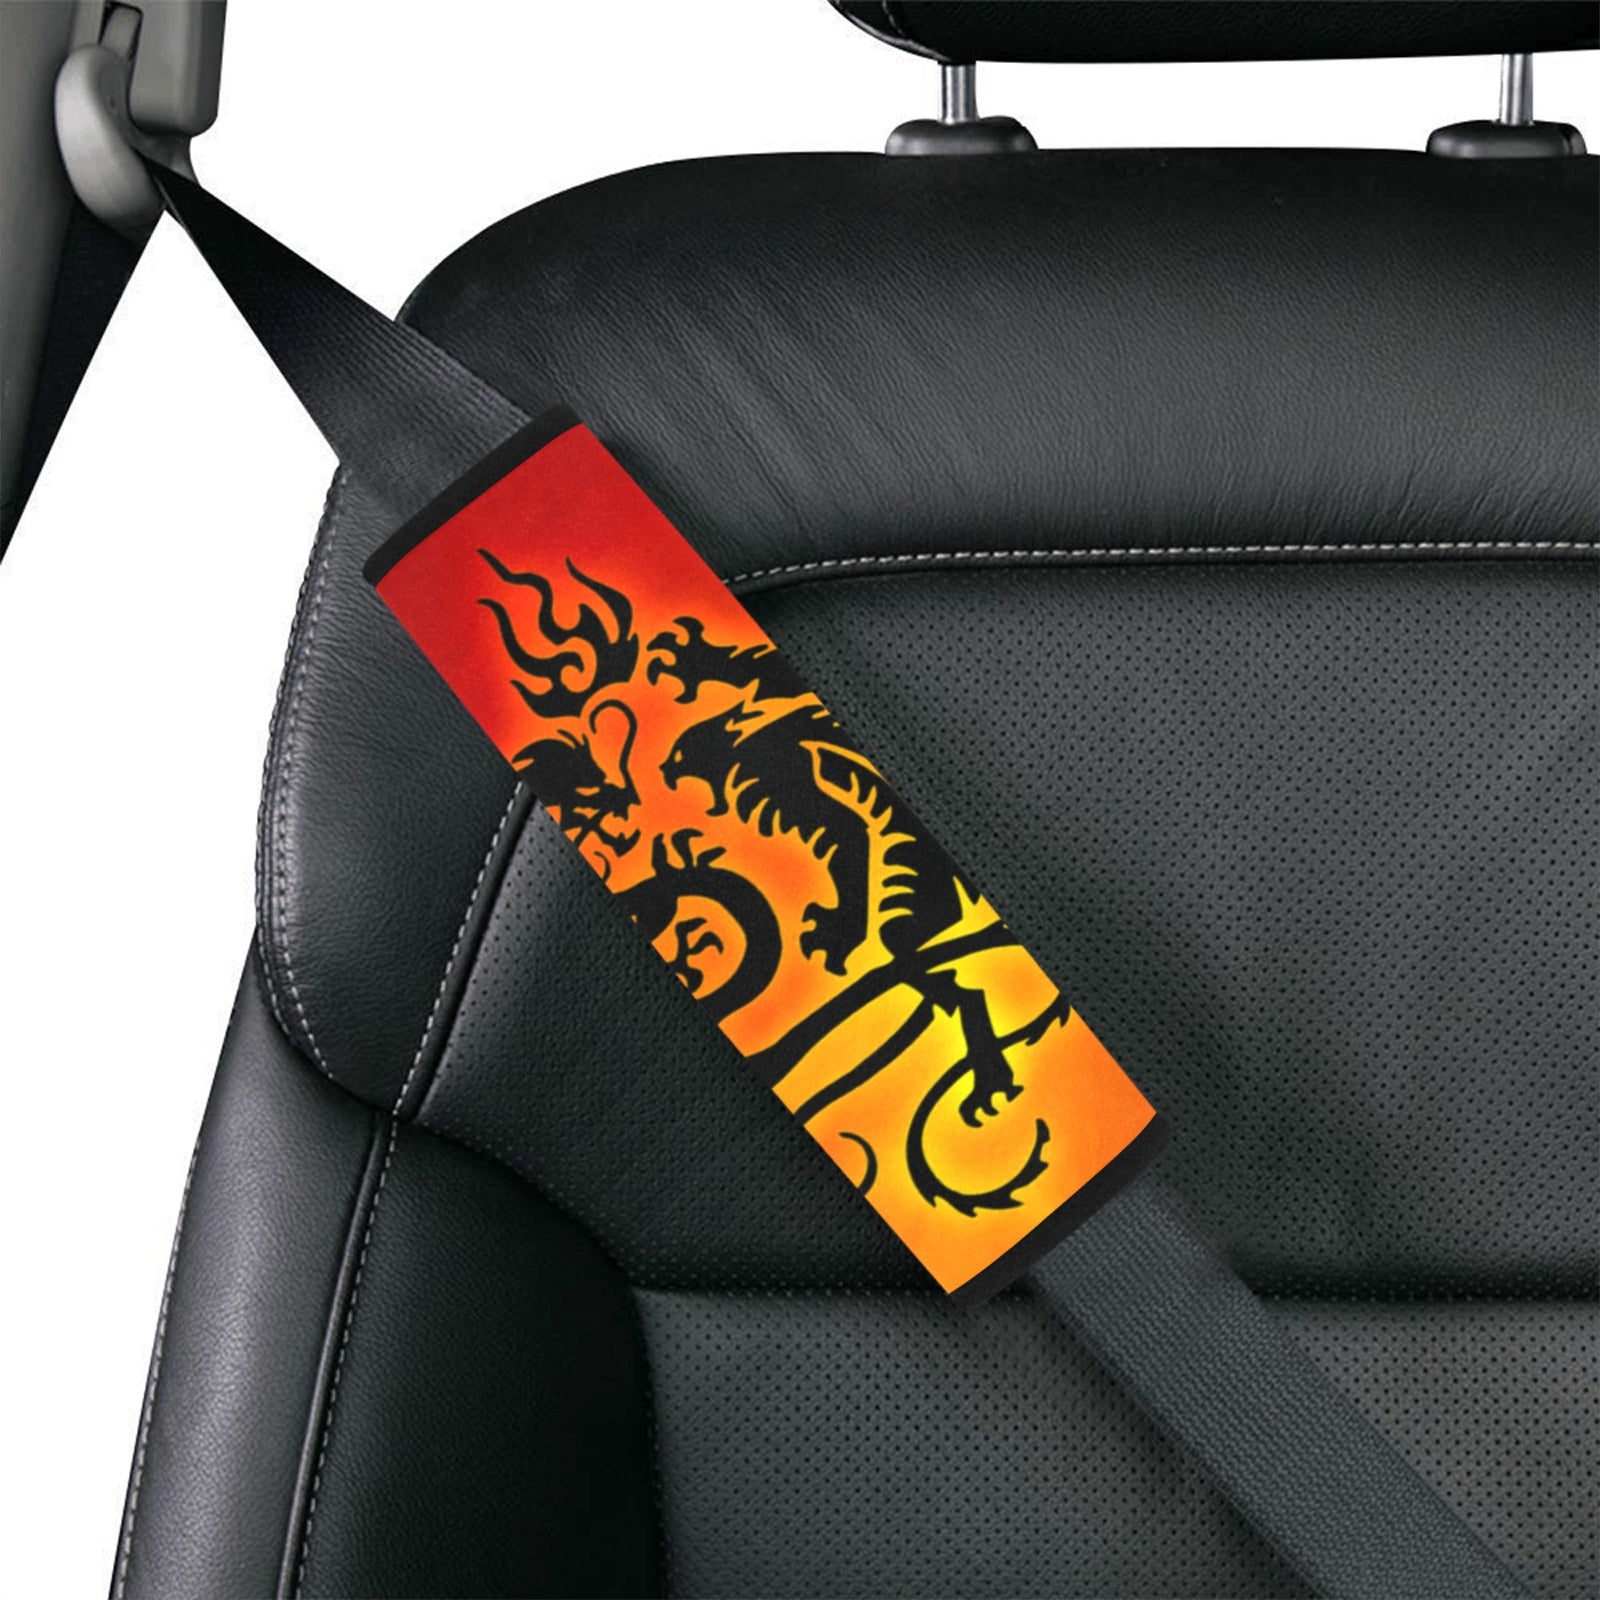 Tribal Tiger and Dragon Seat Belt Cover 7" x 12.6"